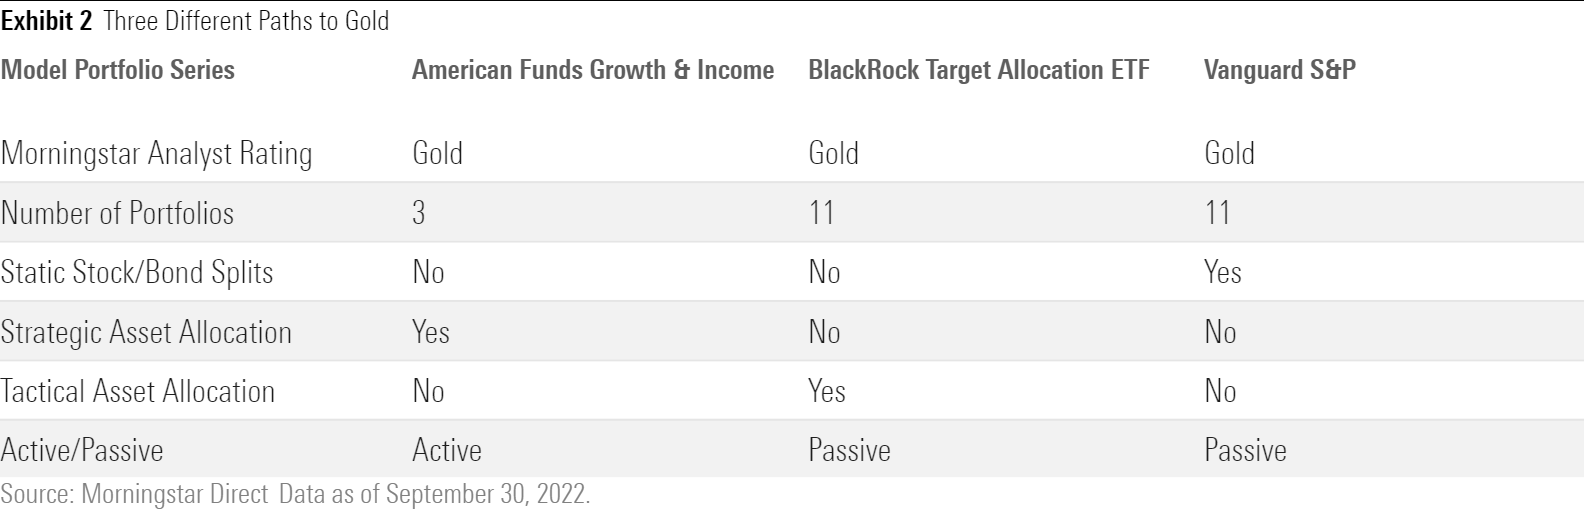 Table depicting the differences between the model portfolios of American Funds, BlackRock, and Vanguard.